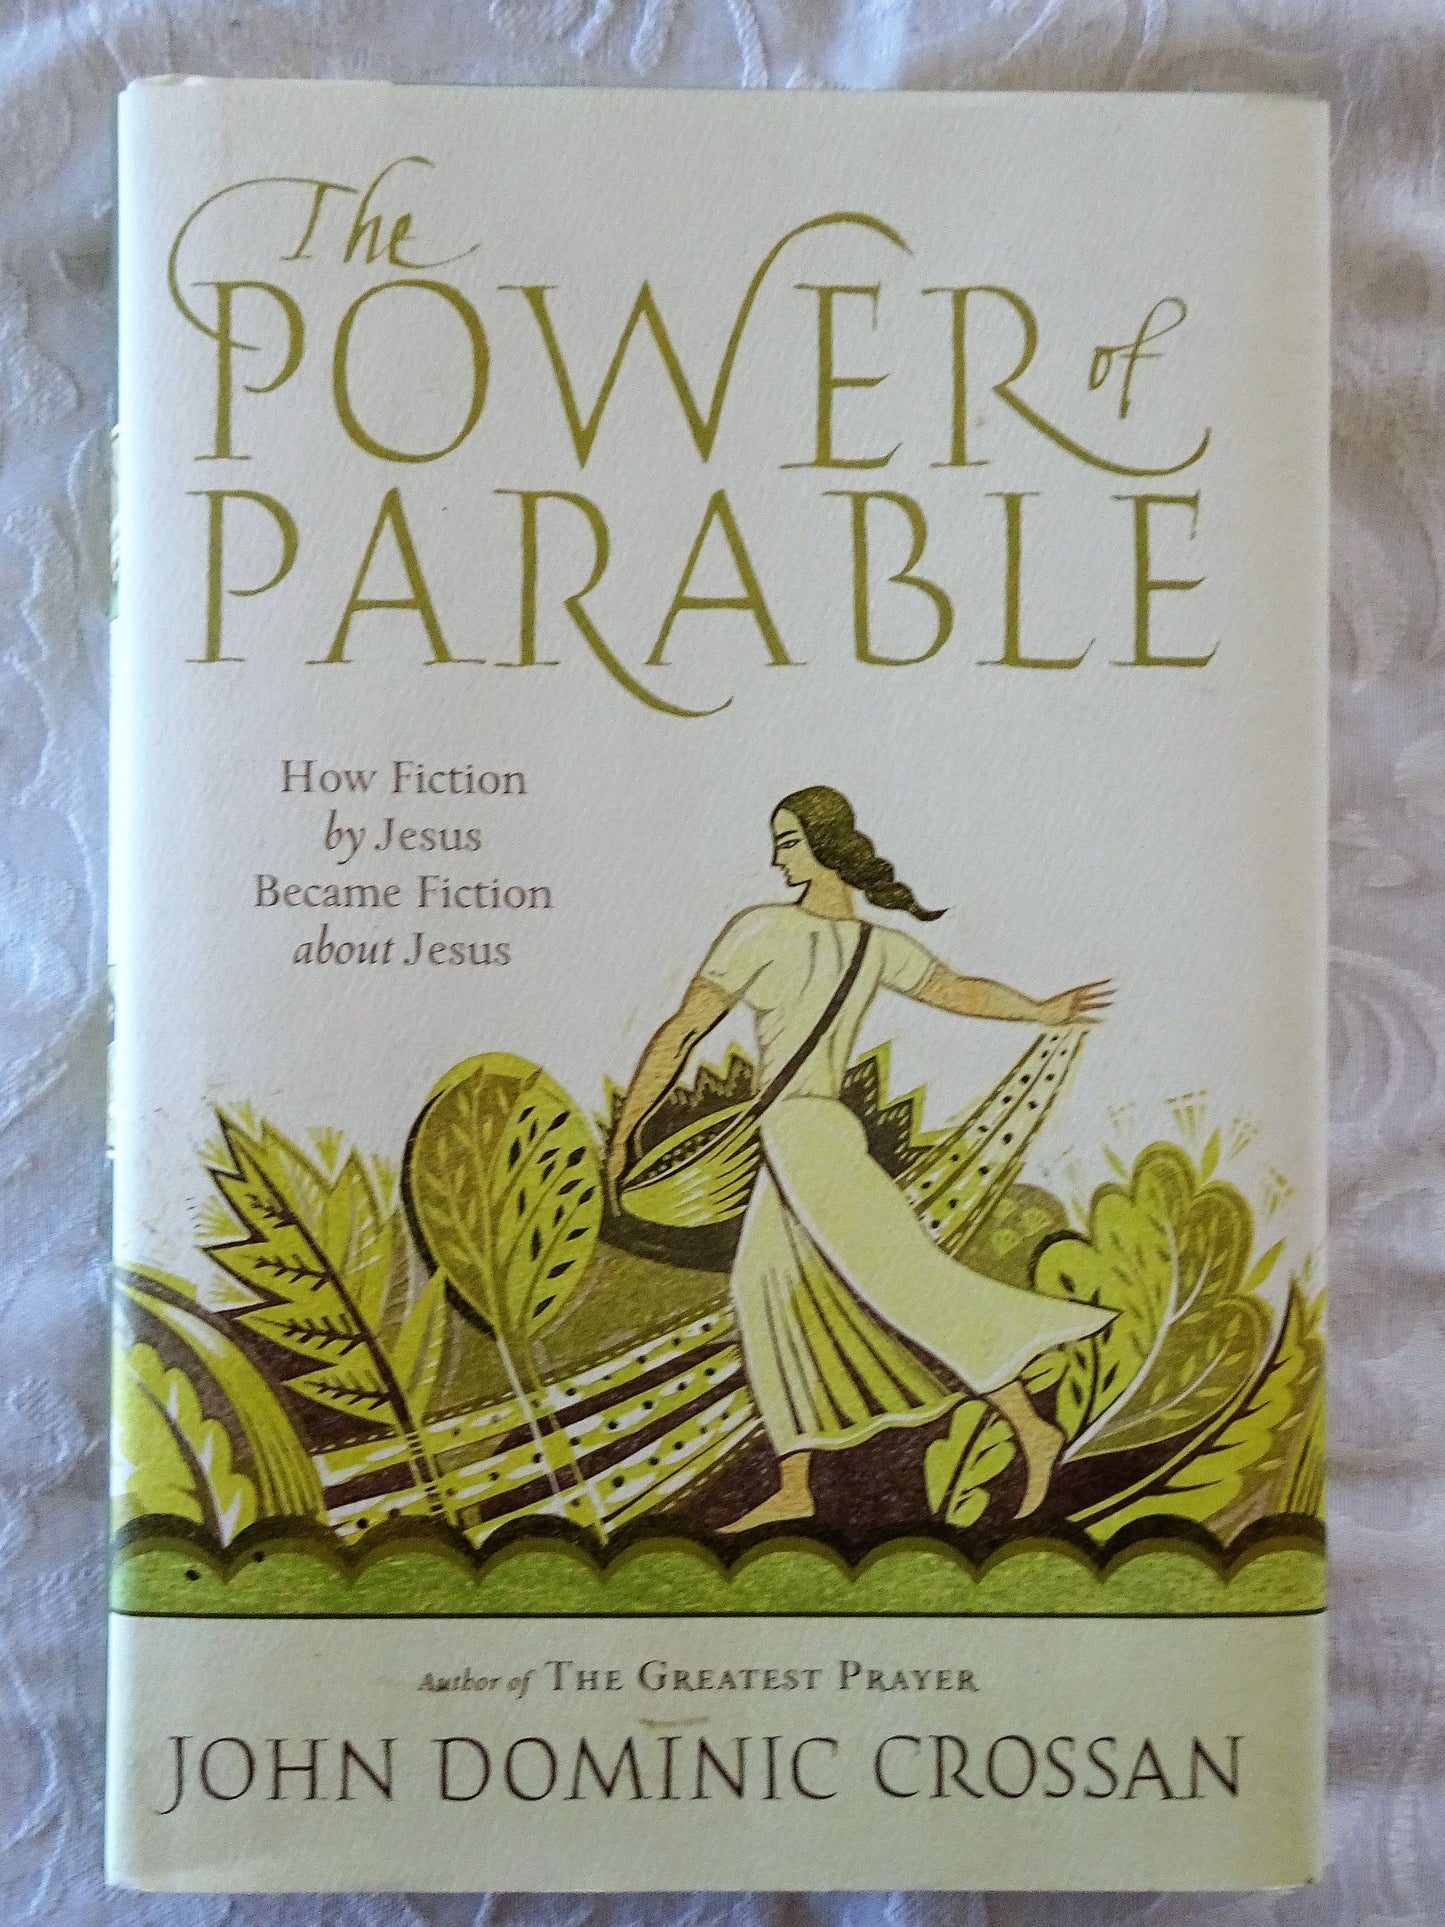 The Power of Parable by John Dominic Crossan